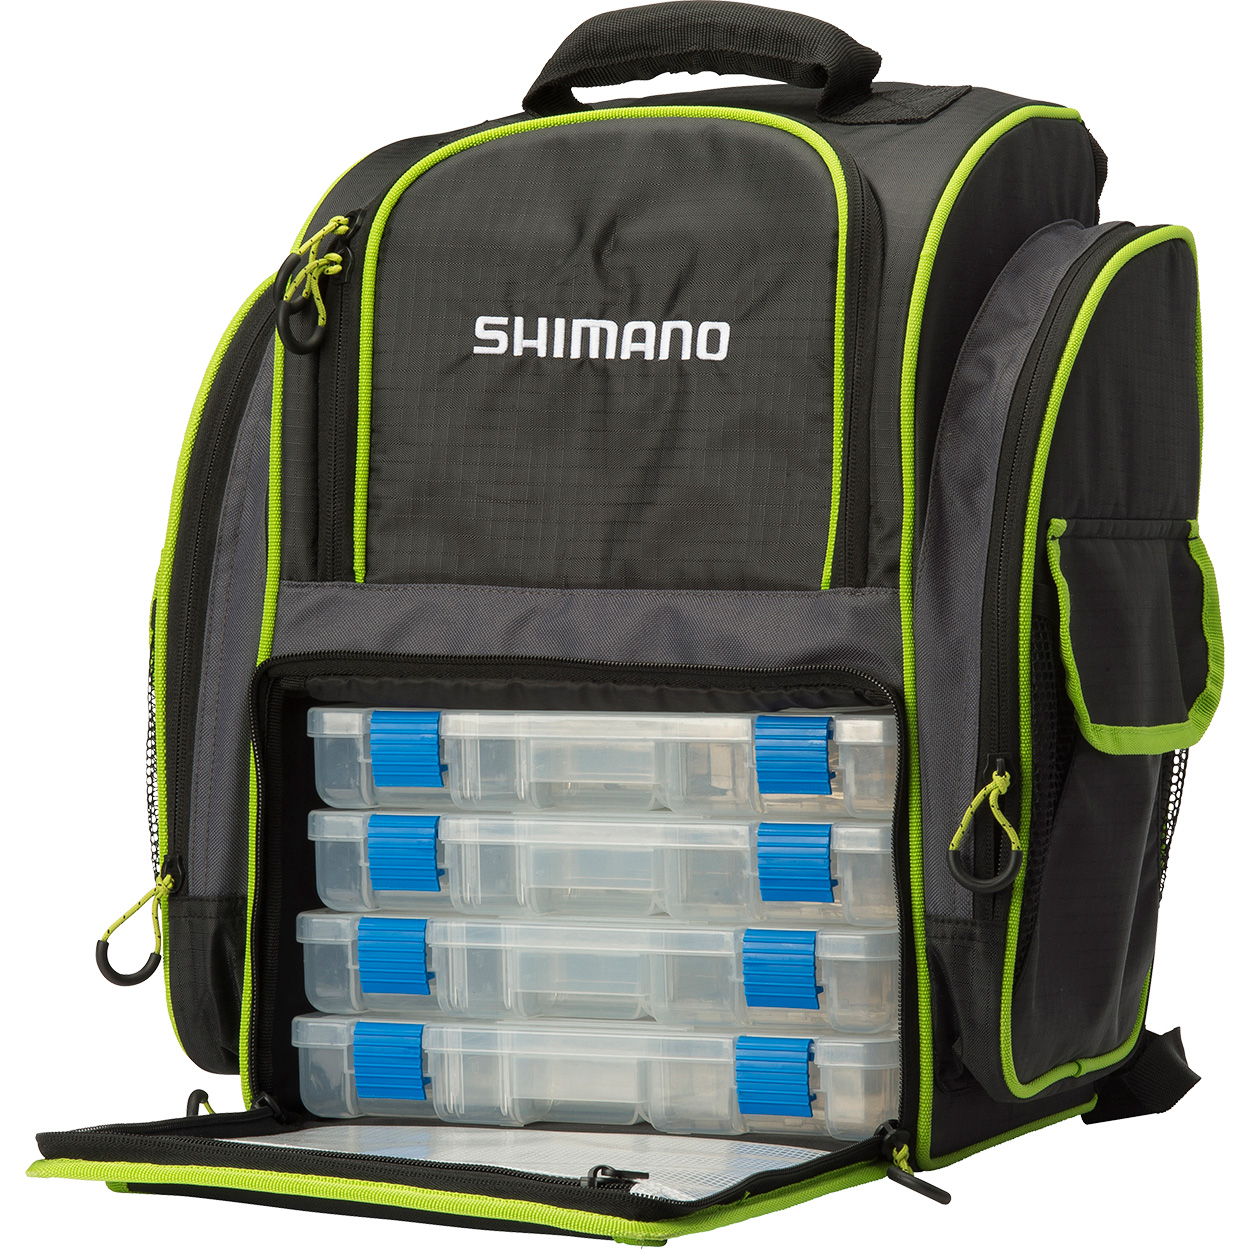 https://www.downsouthcamping.com.au/wp-content/uploads/2023/07/Shimano-Back-Pack-With-Tackle-Boxs.jpg